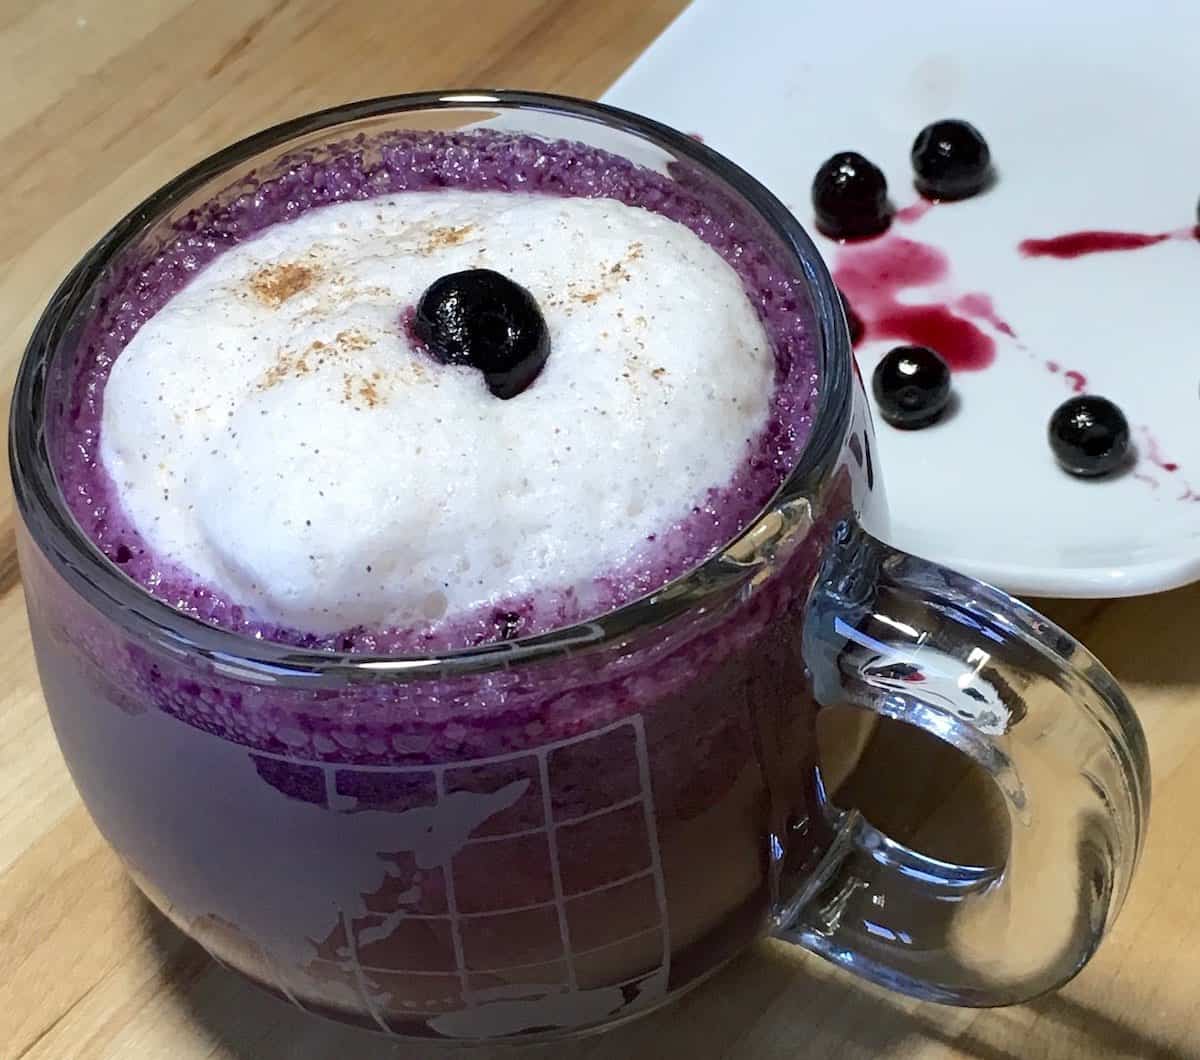 blueberry latte with wild blueberries